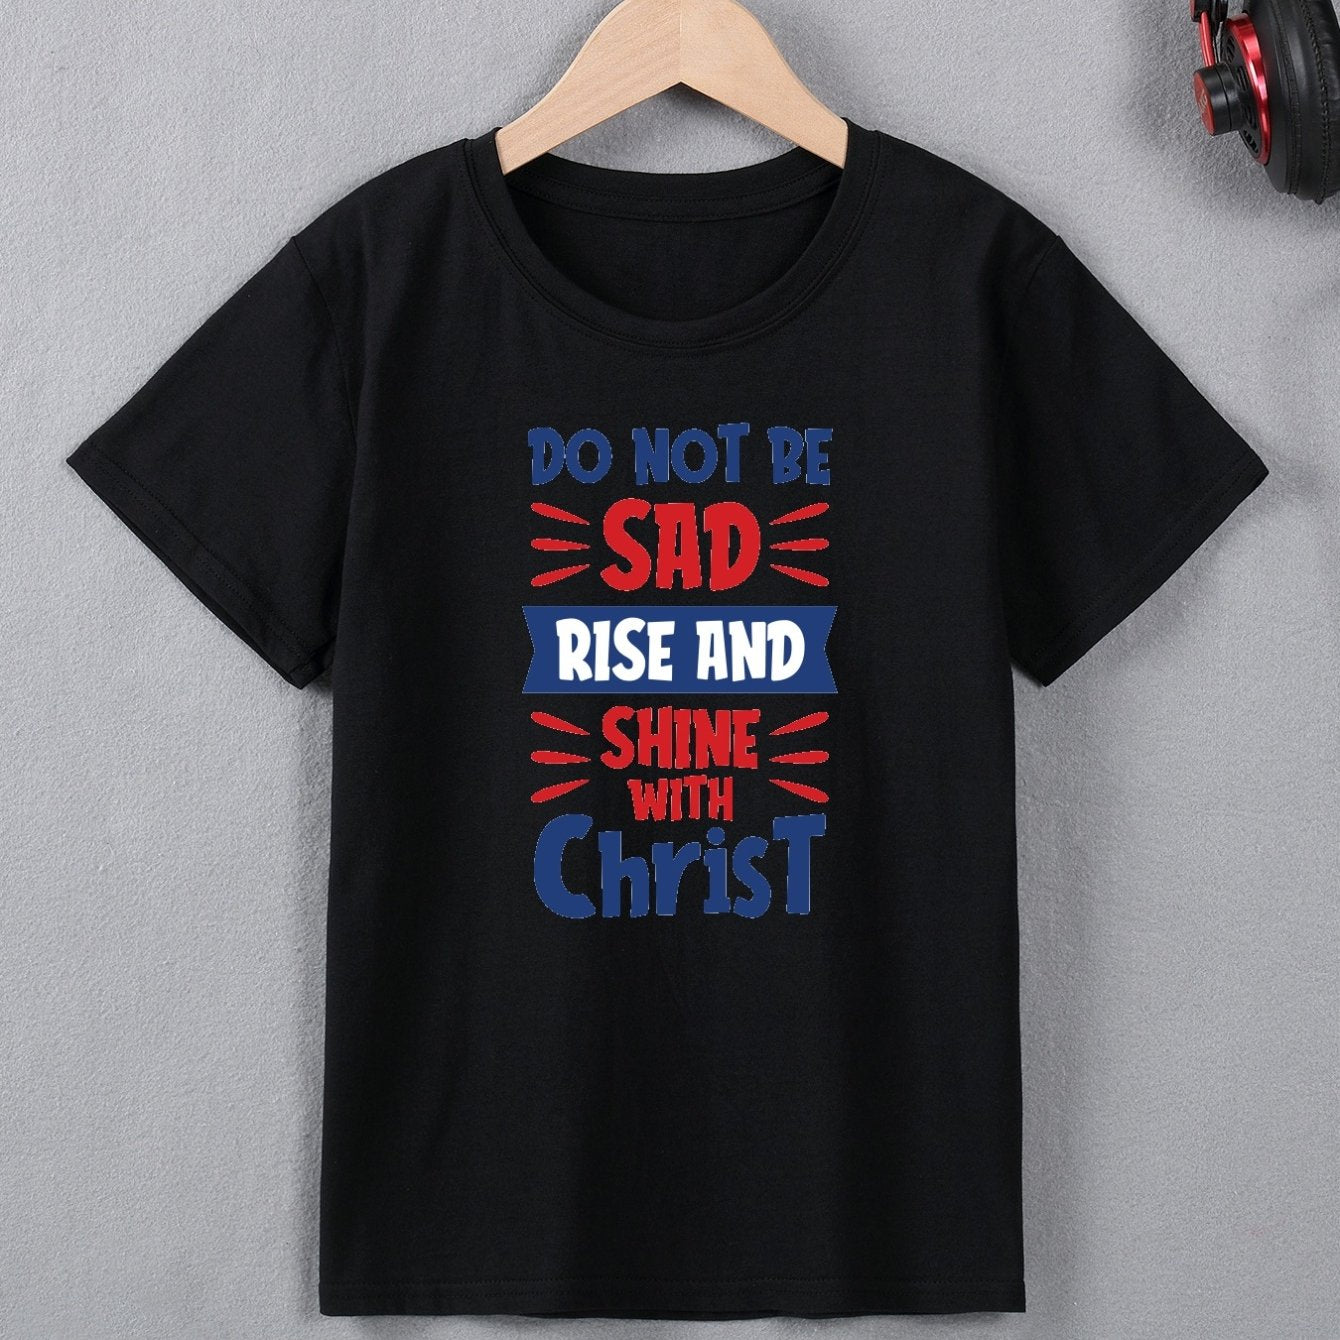 DO NOT BE SAD RISE AND SHINE WITH CHRIST Youth Christian T-shirt claimedbygoddesigns